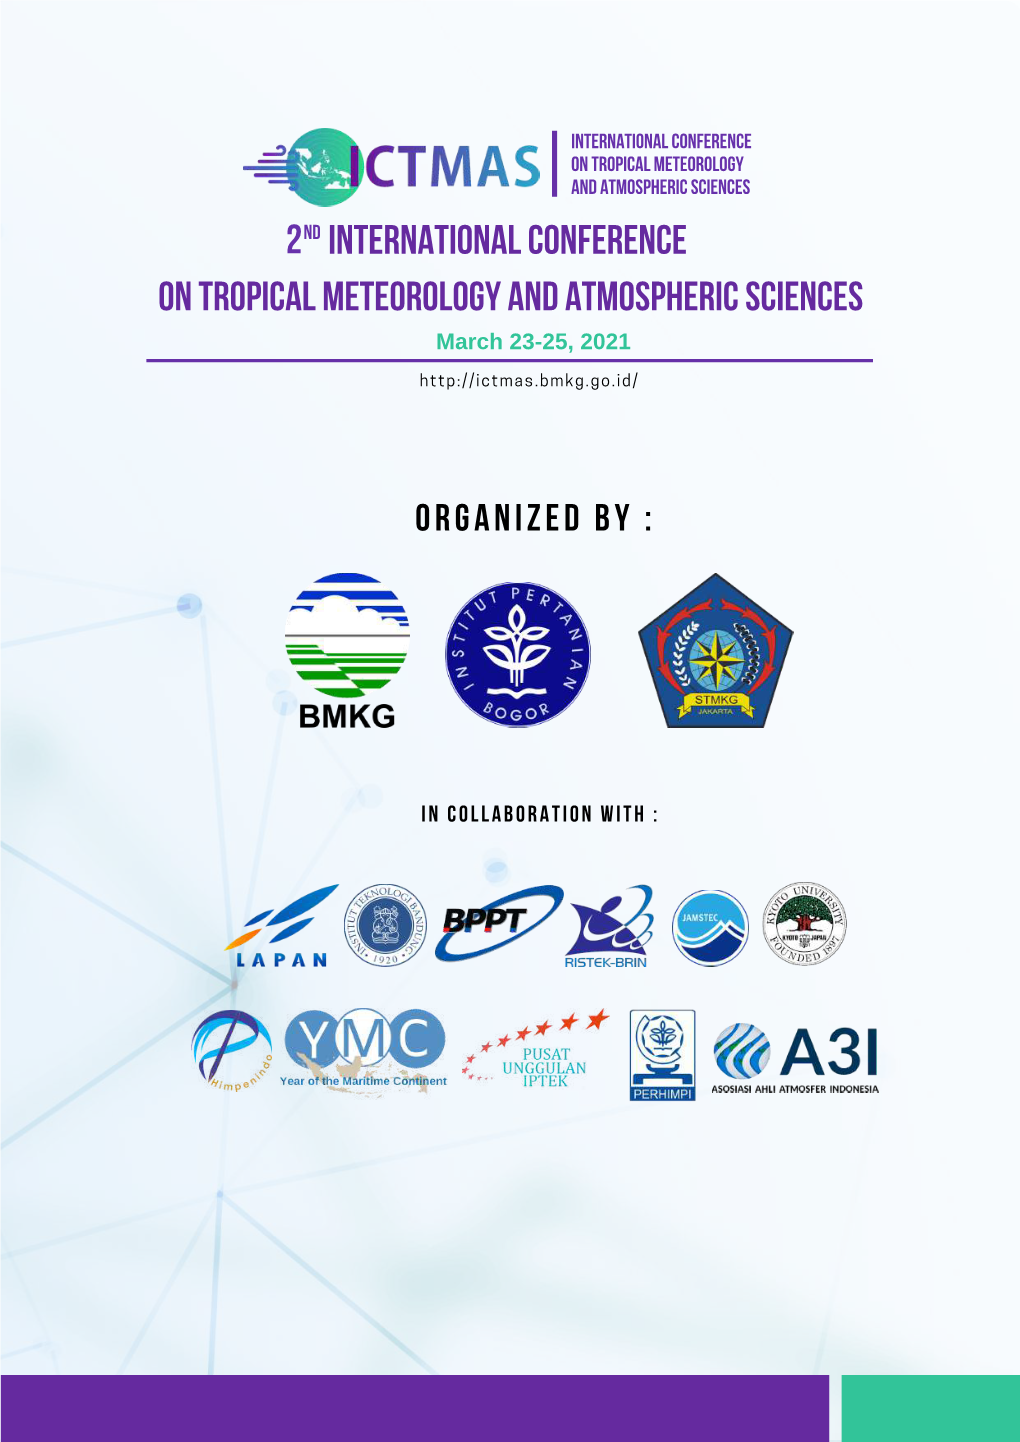 International Conference on Tropical Meteorology and Atmospheric